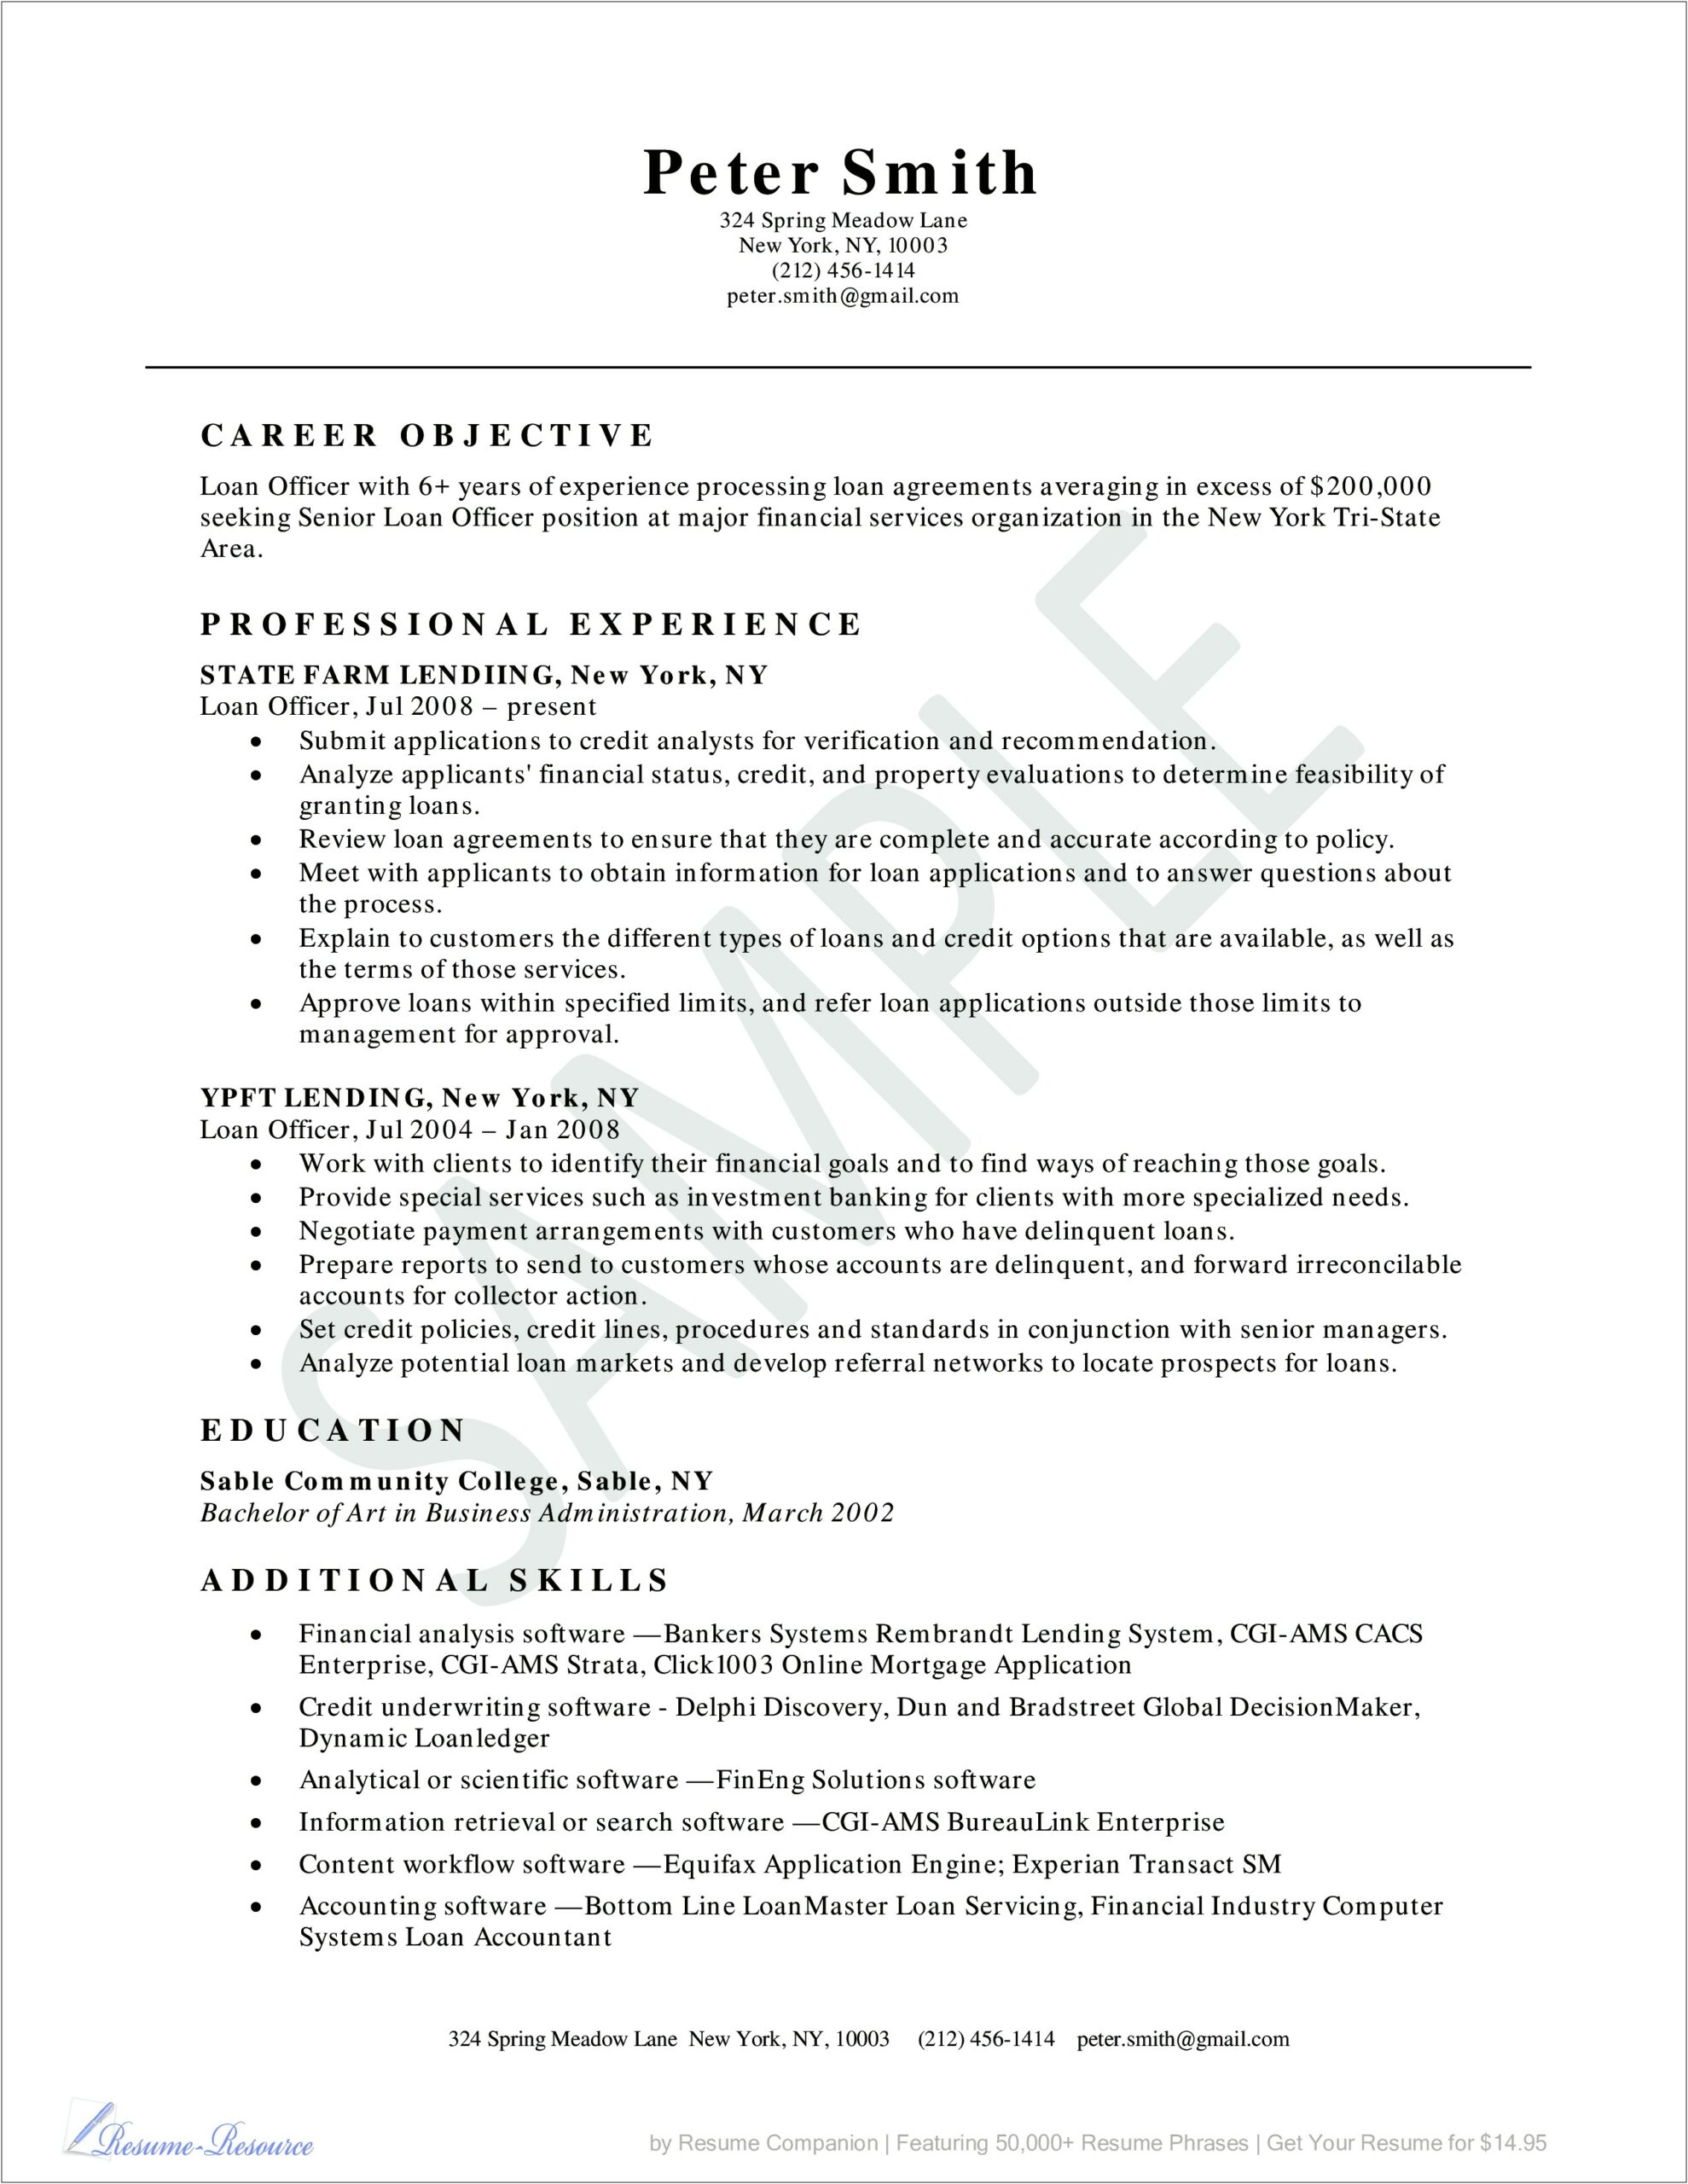 Resume Objective For Loan Specialist